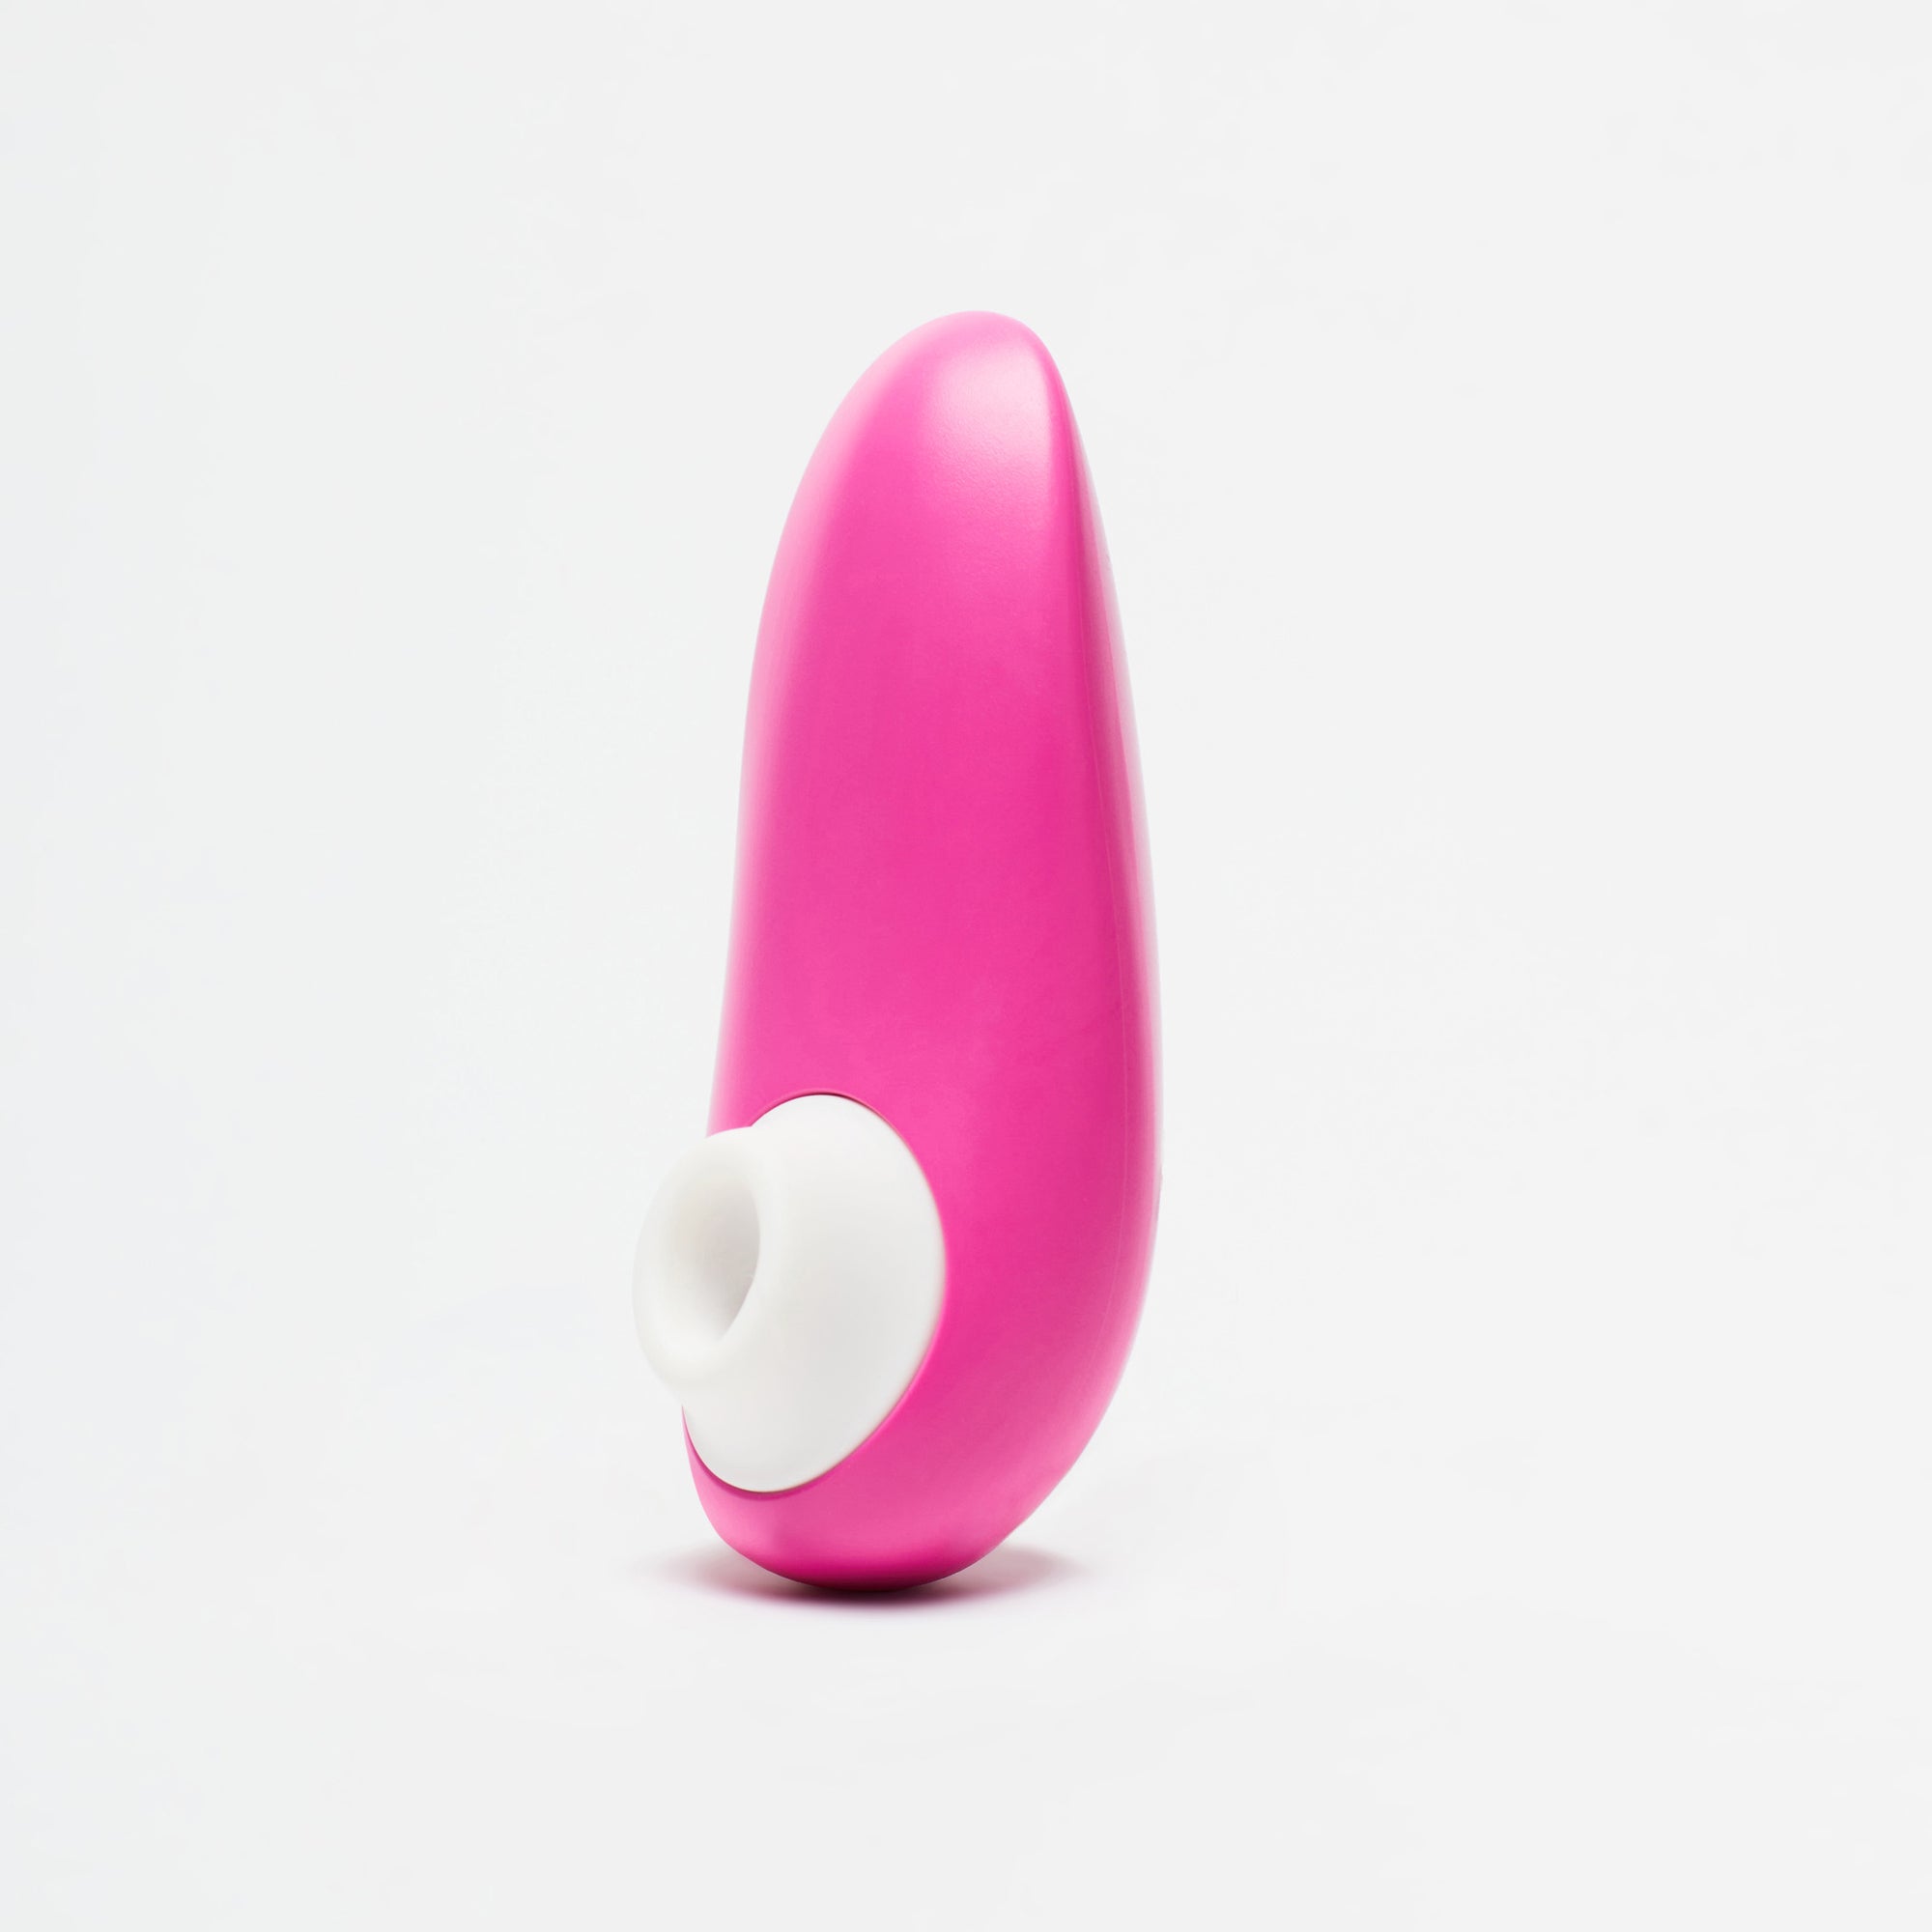 Womanizer Starlet 3 Suction Toy